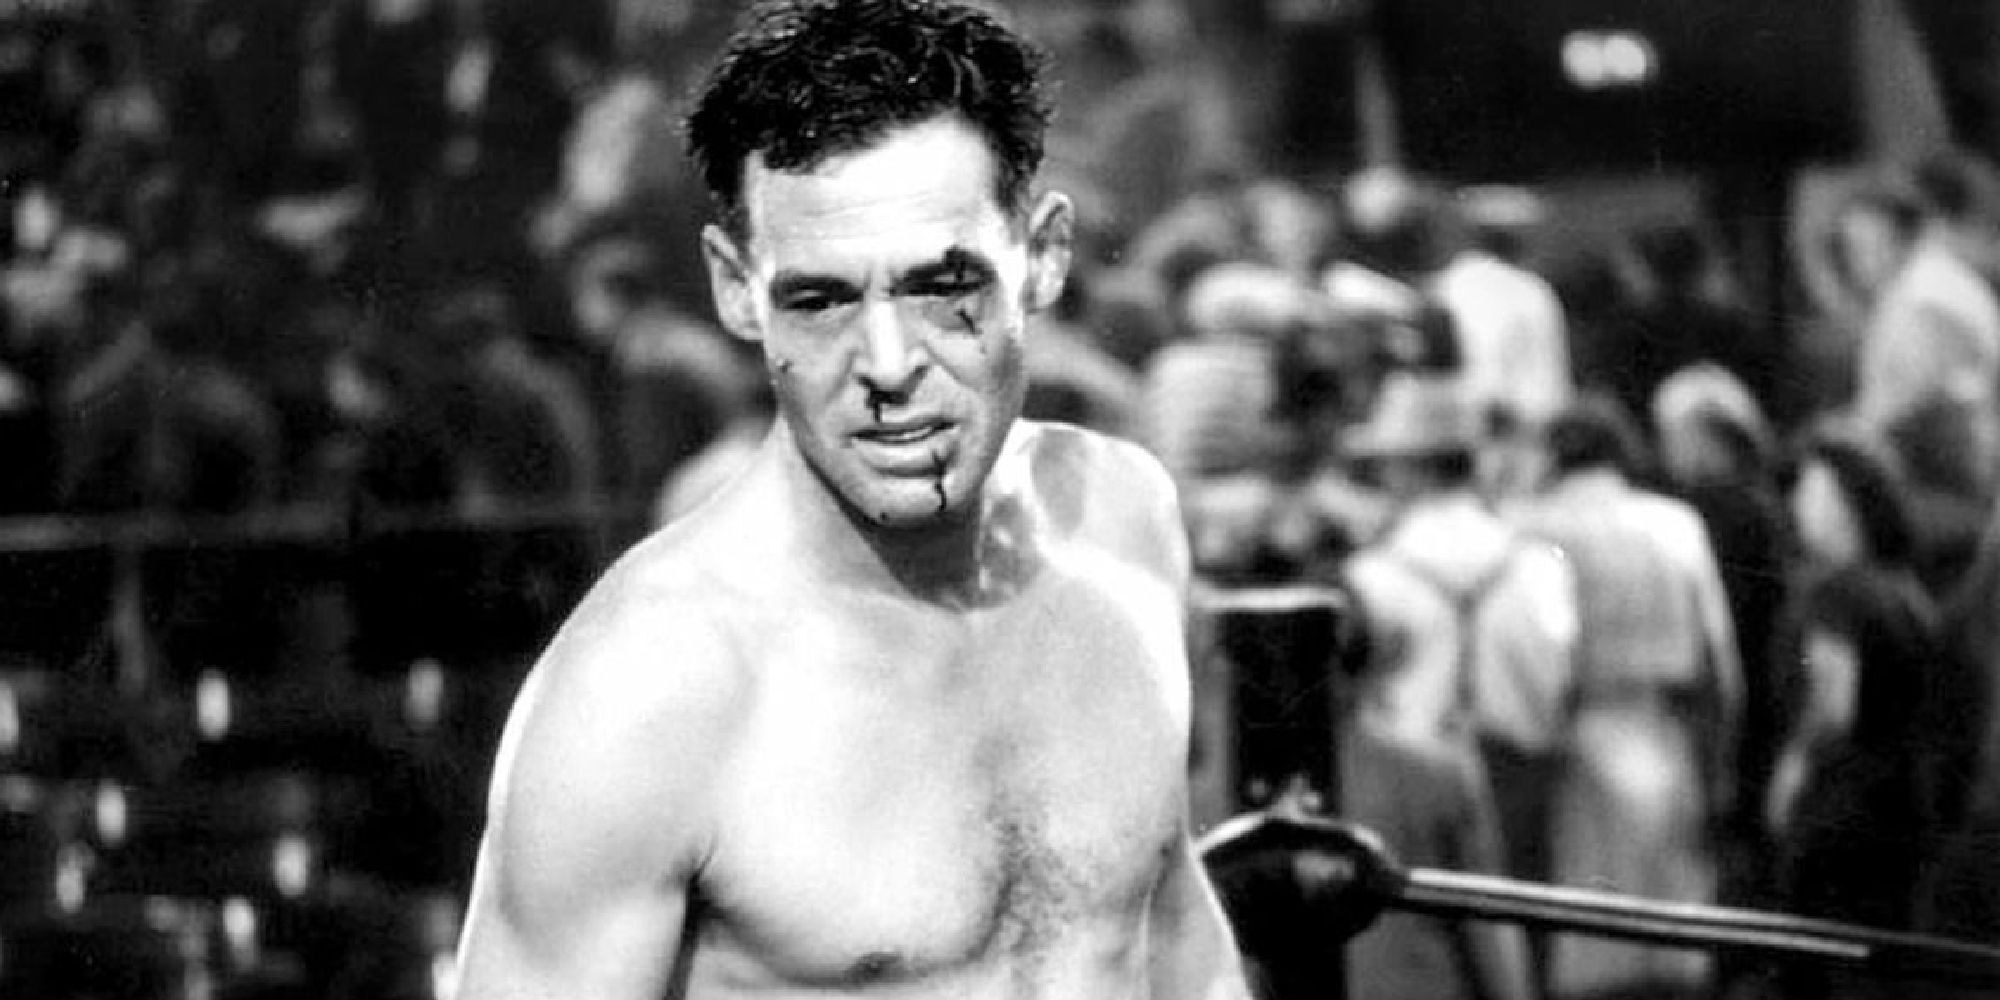 Robert Ryan as Bill with a bloody face inside a boxing ring in The Set-Up